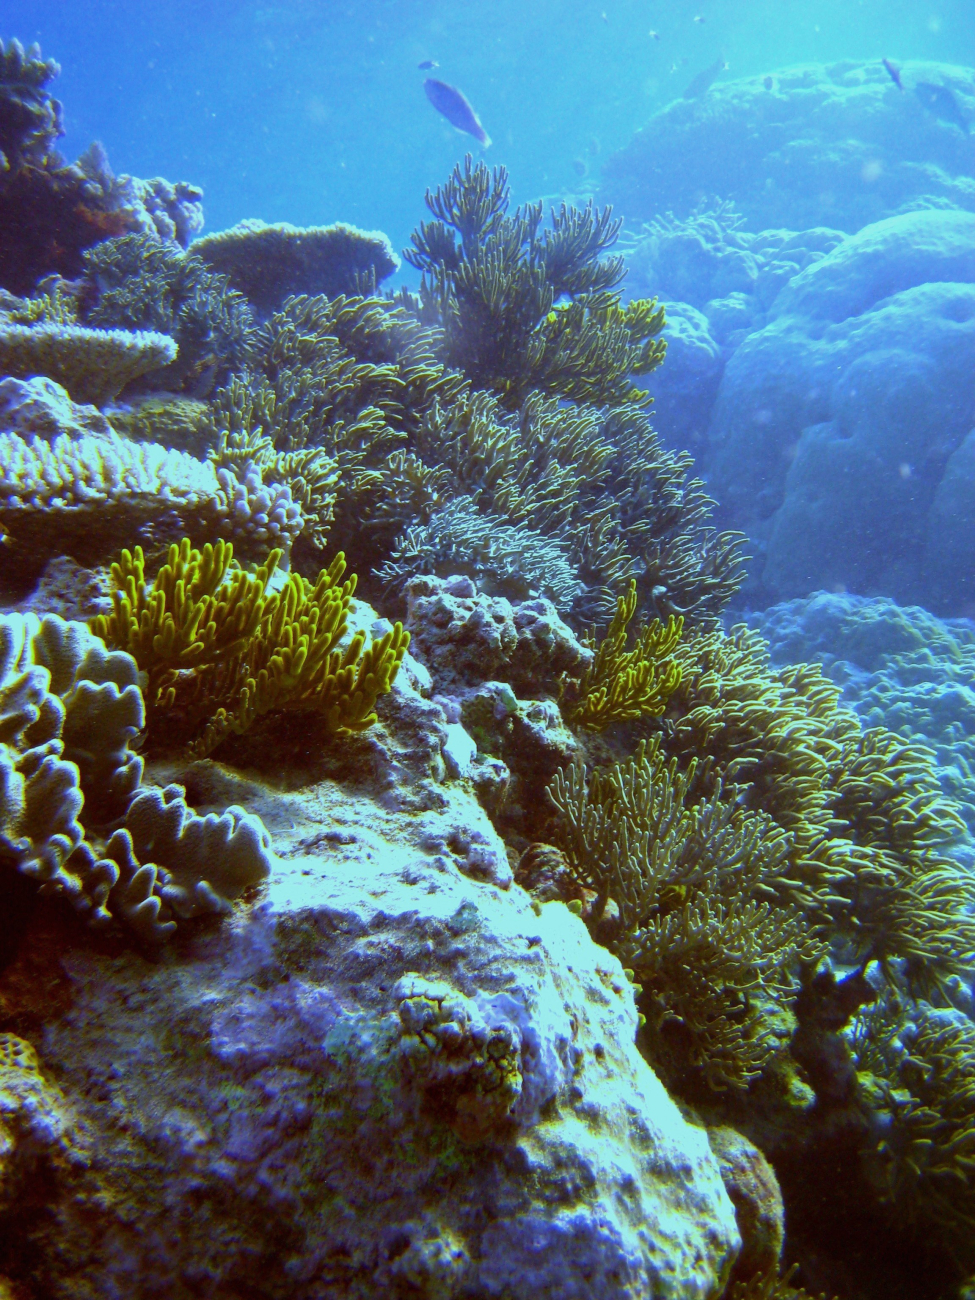 Reef scene with coral and algae